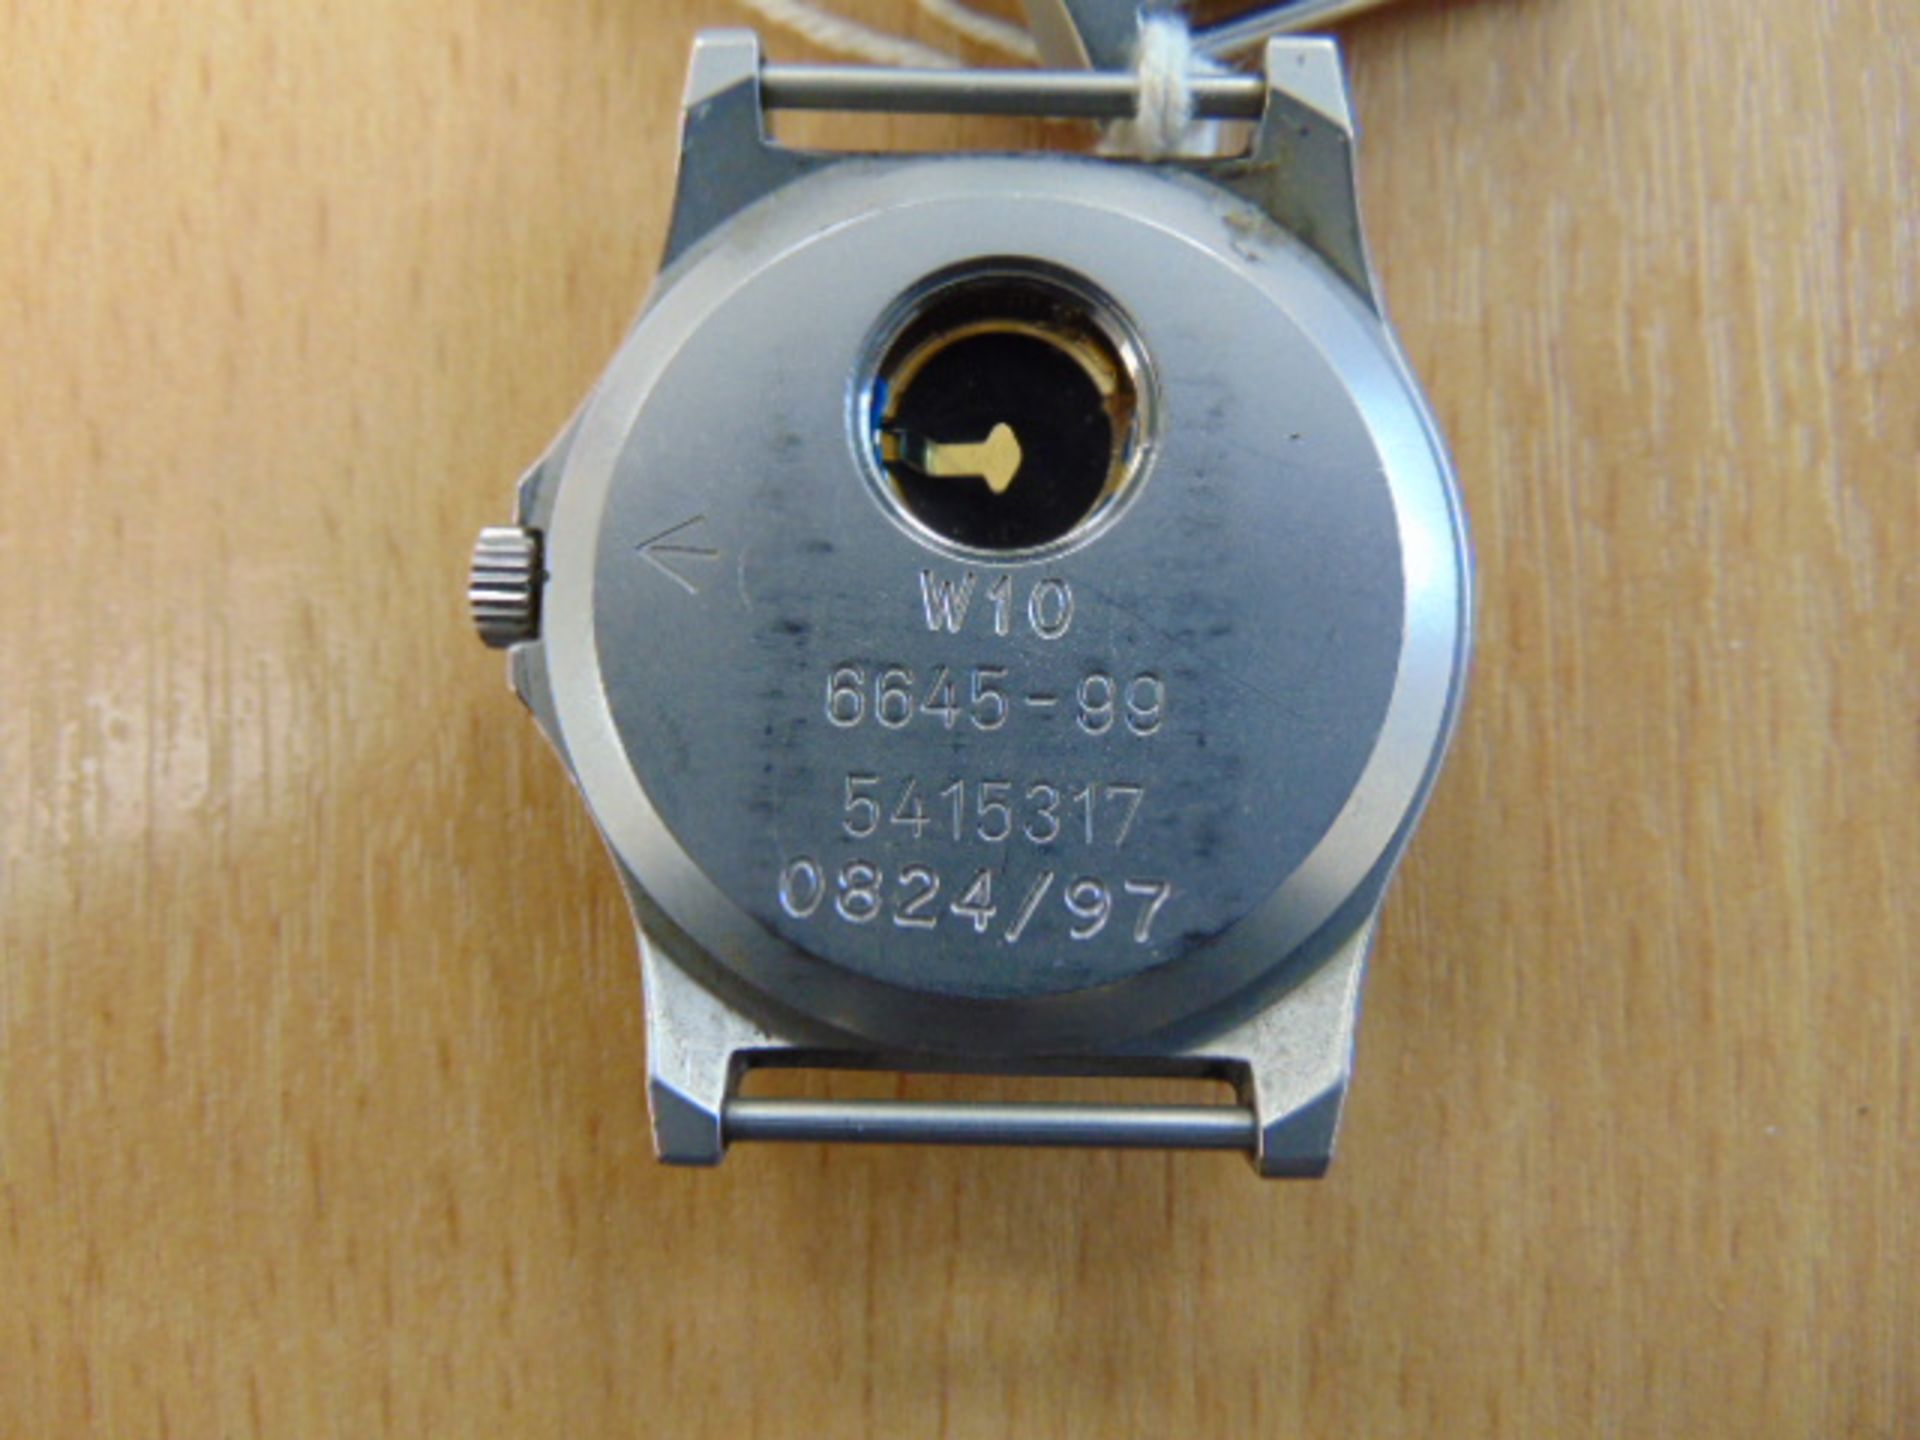 2X W10 CWC SERVICE WATCHES -DAMAGED GLASS DATED 1991 / 1997 - Image 7 of 8